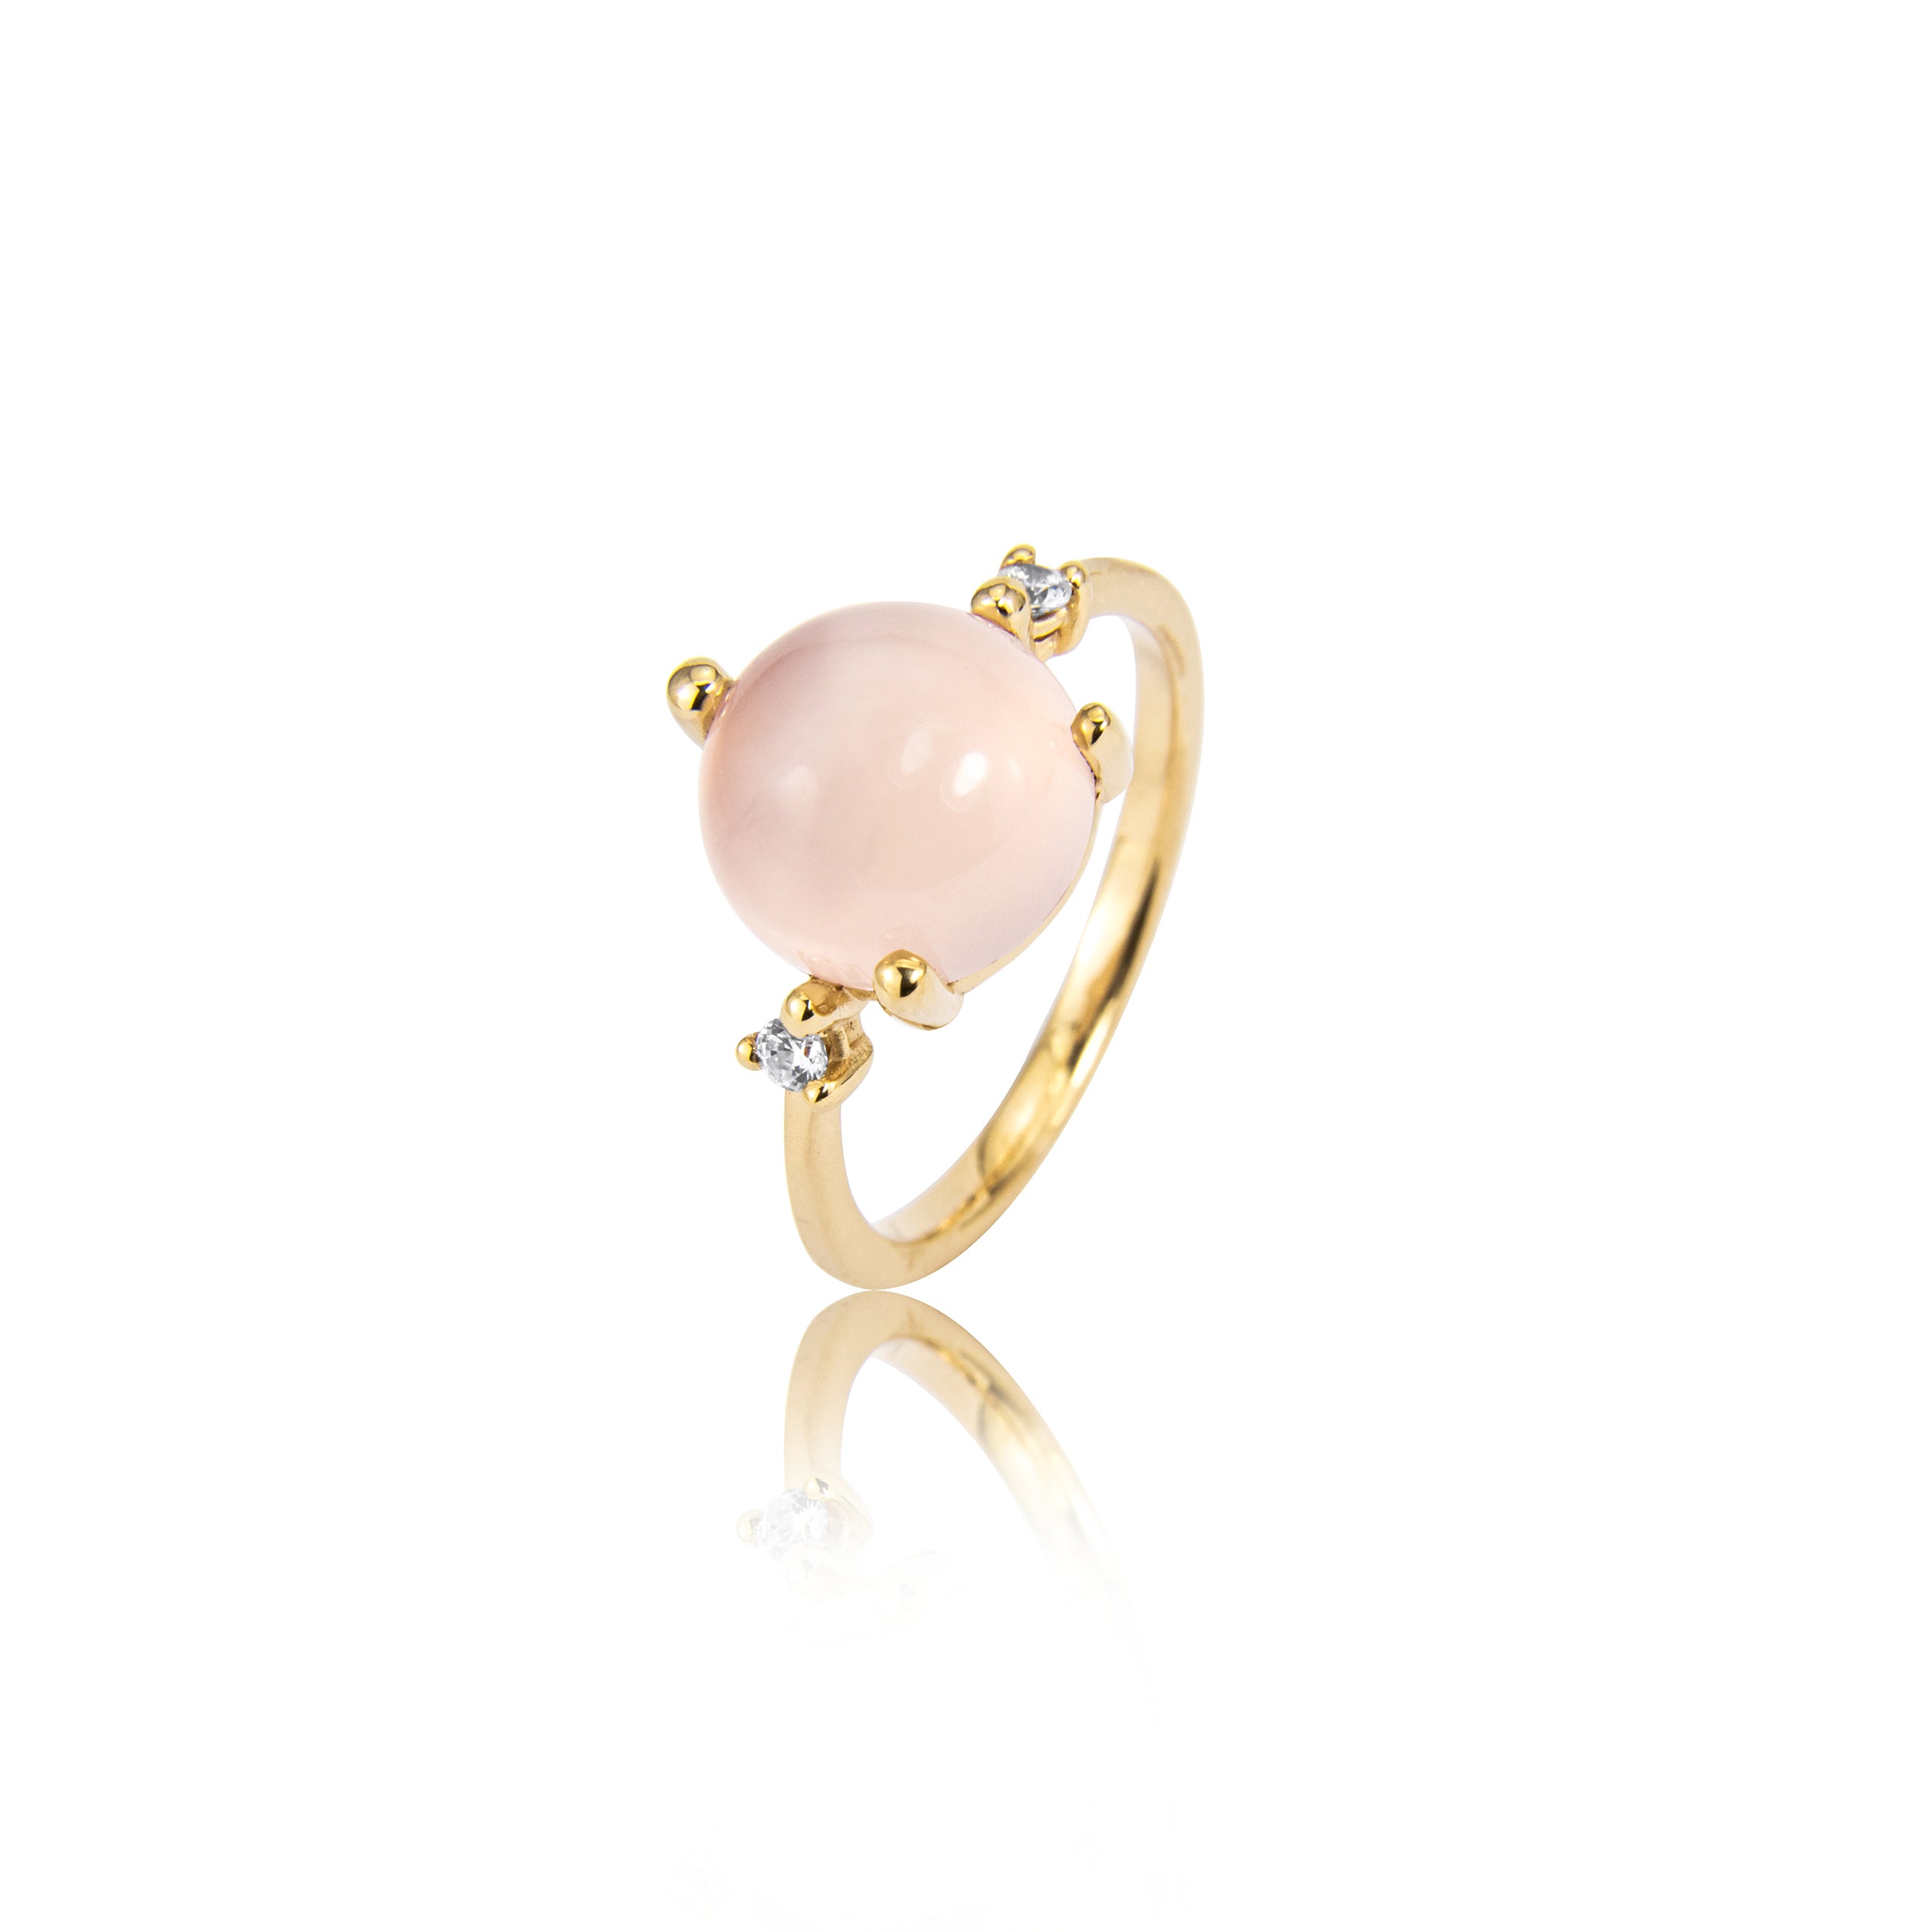 Stellini ring "big" in 585/- gold with pink quartz